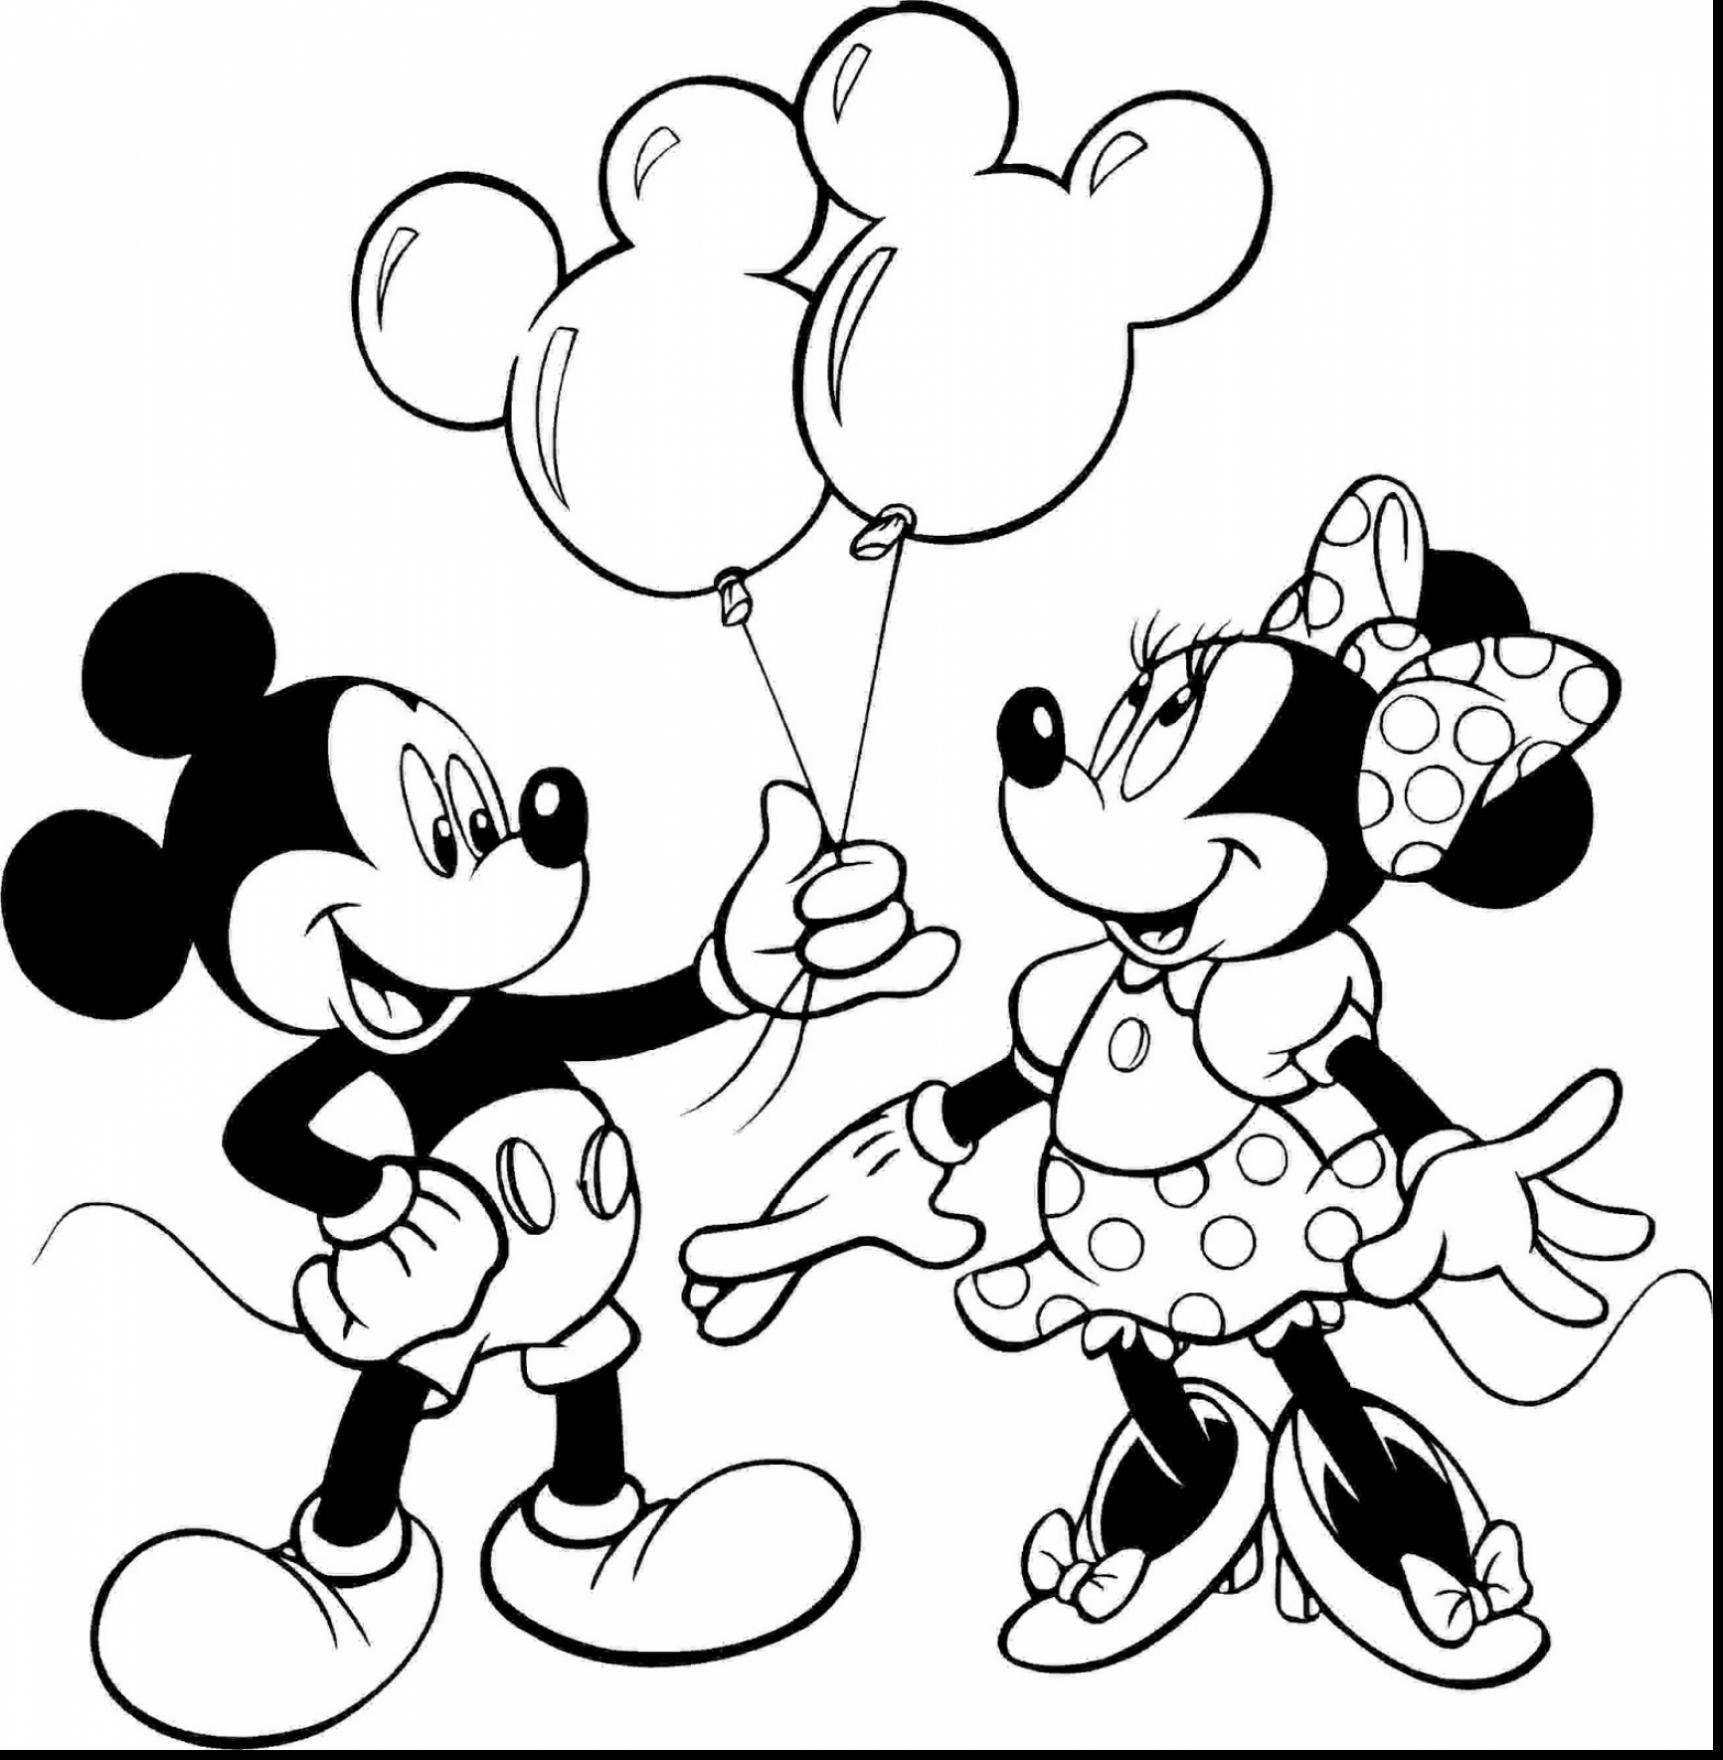 Princess Minnie Mouse Coloring Pages at GetColorings.com | Free